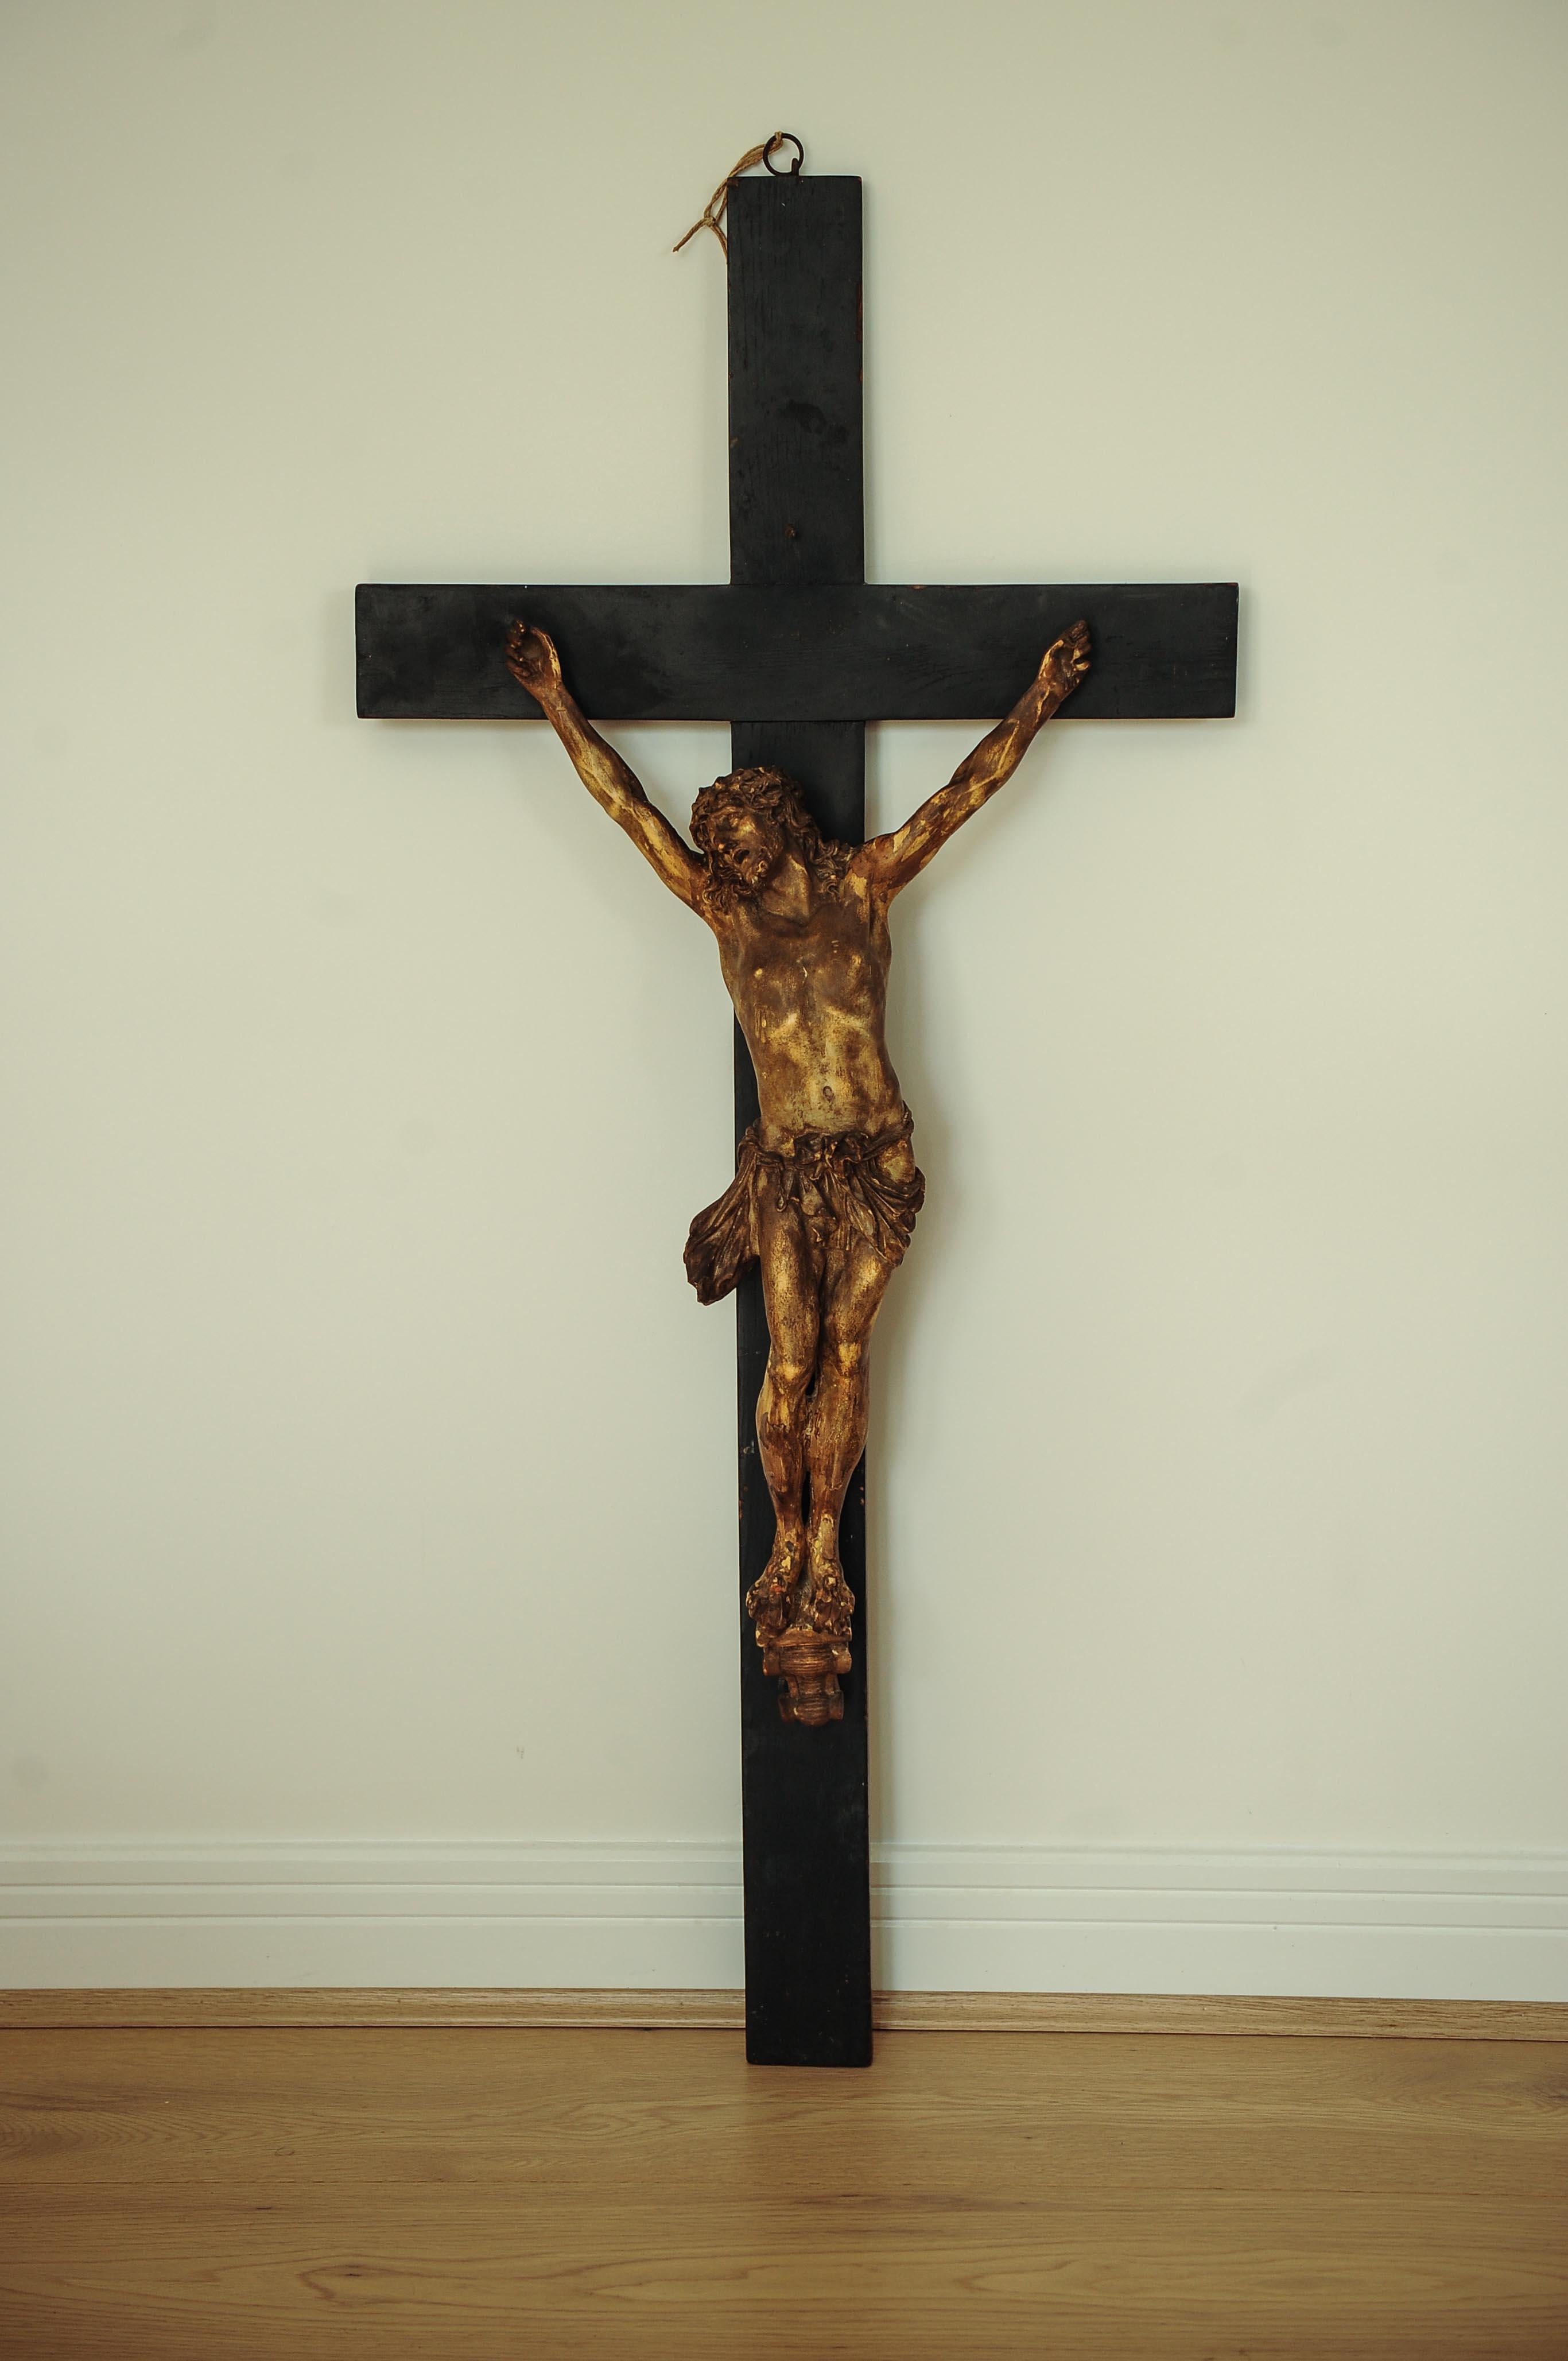 A superb 18th century example of Jesus Christ crucified on the cross. Figure has been sculpted from plaster and afixed to a simple wooden cross.